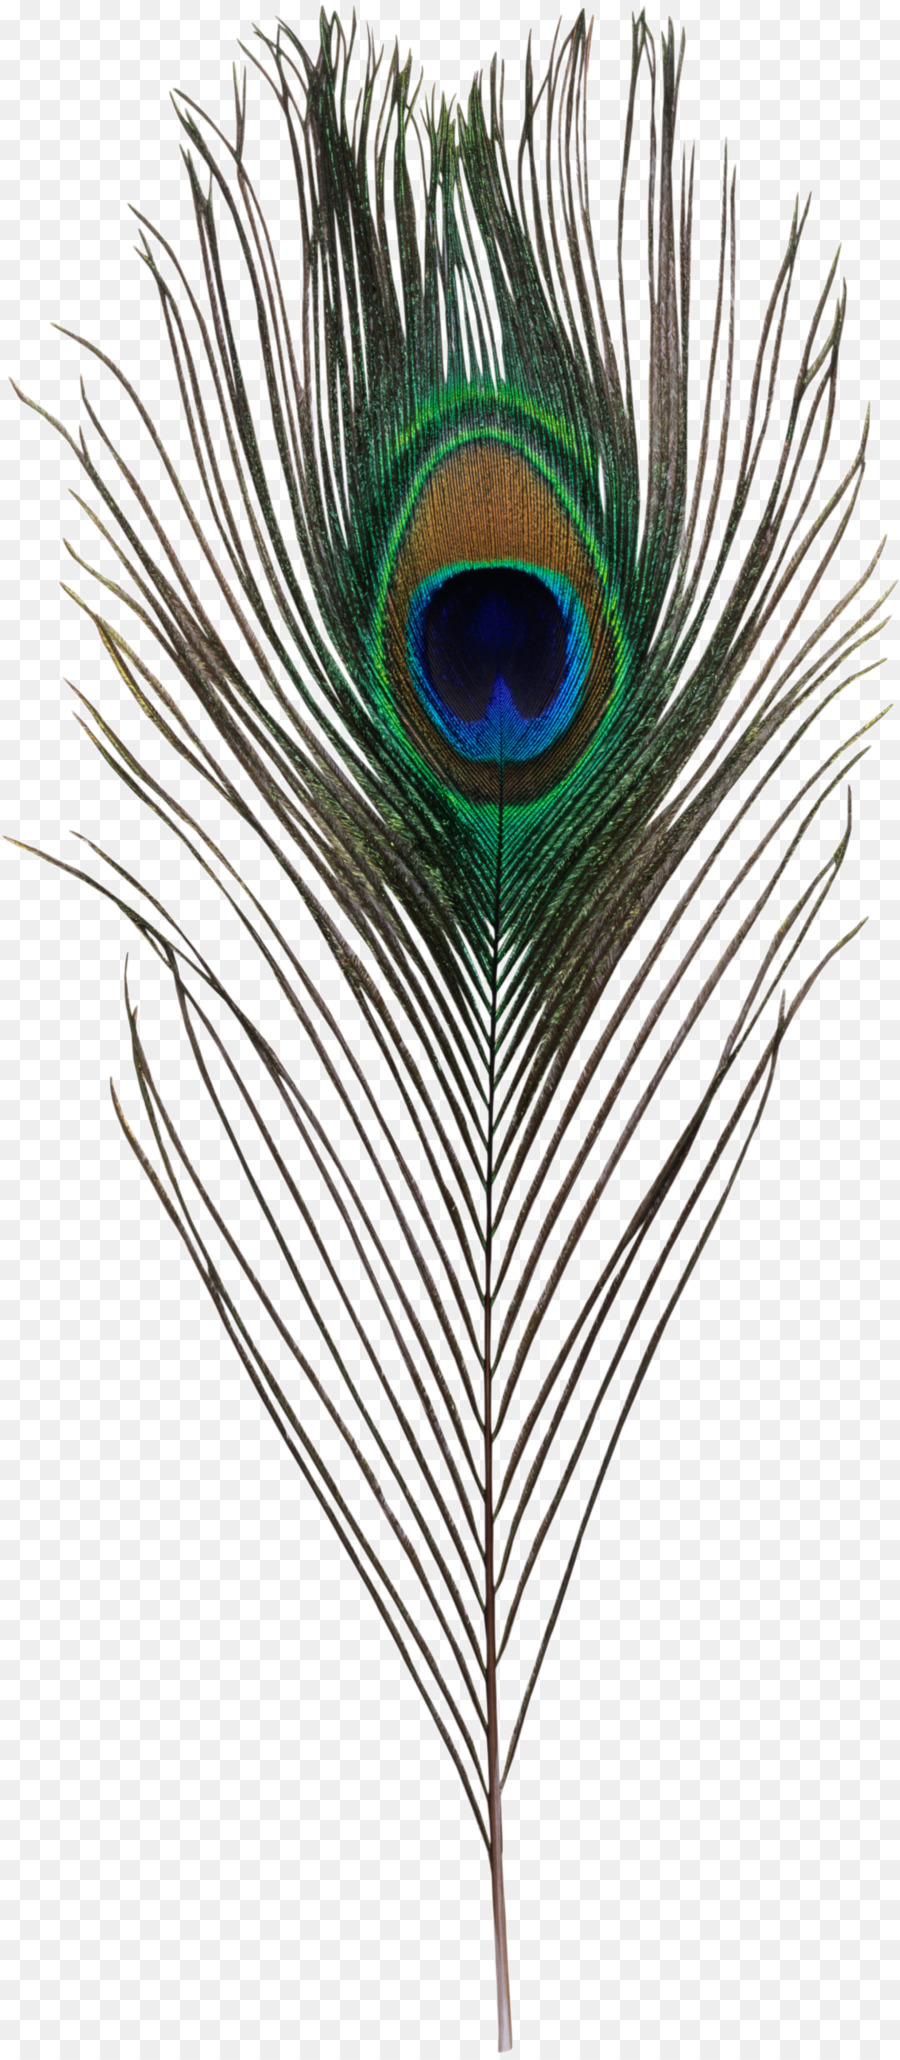 Bird Asiatic peafowl Feather Simple eye in invertebrates - Peacock feather png download - 1568*3584 - Free Transparent Bird png Download.